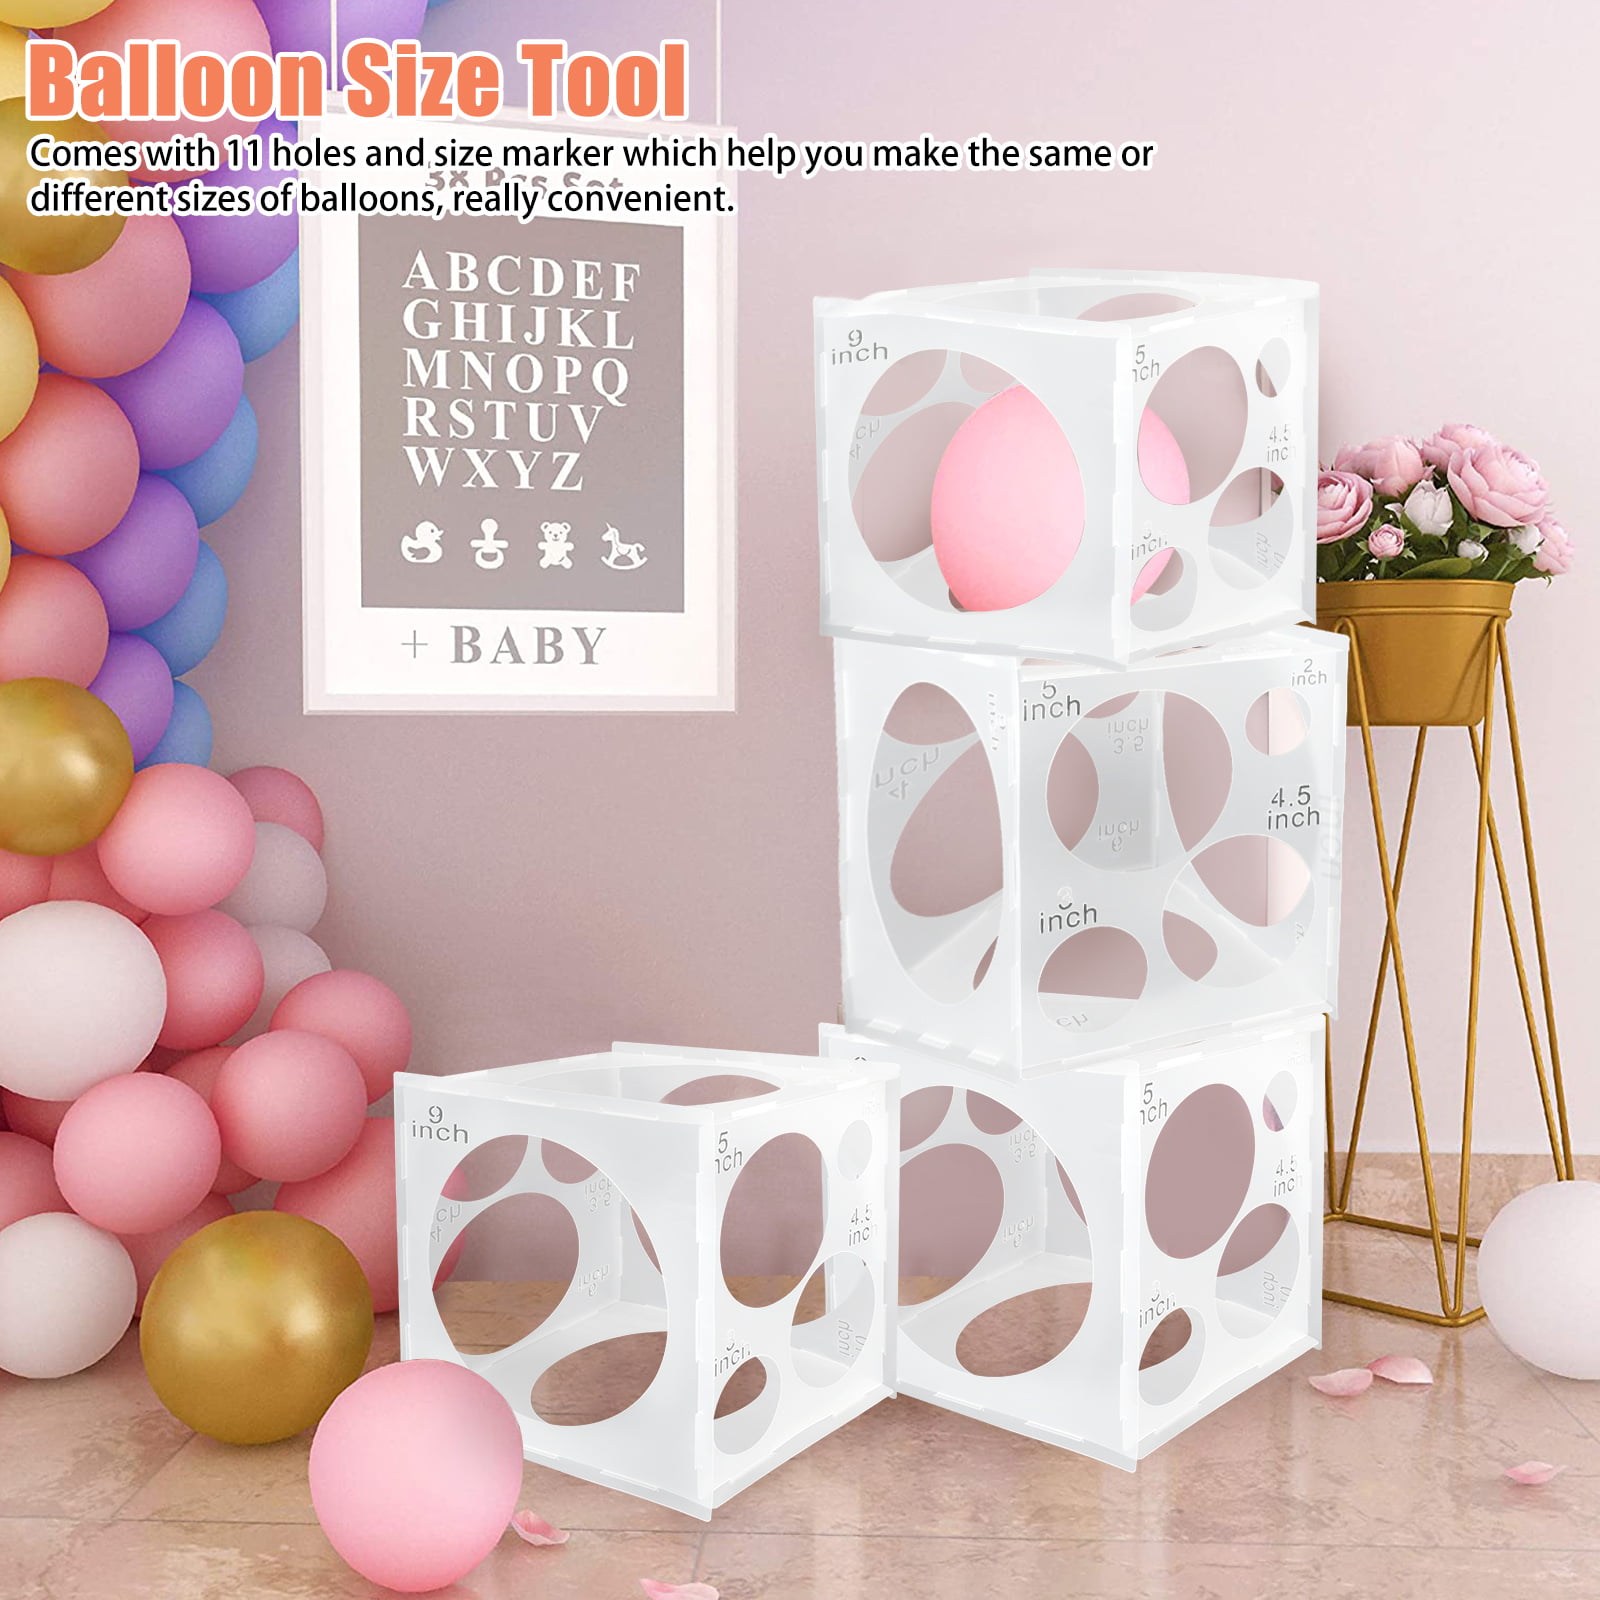 Auihiay 9 Holes Collapsible Plastic Balloon Sizer Box Cube, Balloon Size Measurement Tool for Balloon Decorations, Balloon Arches, Balloon Columns